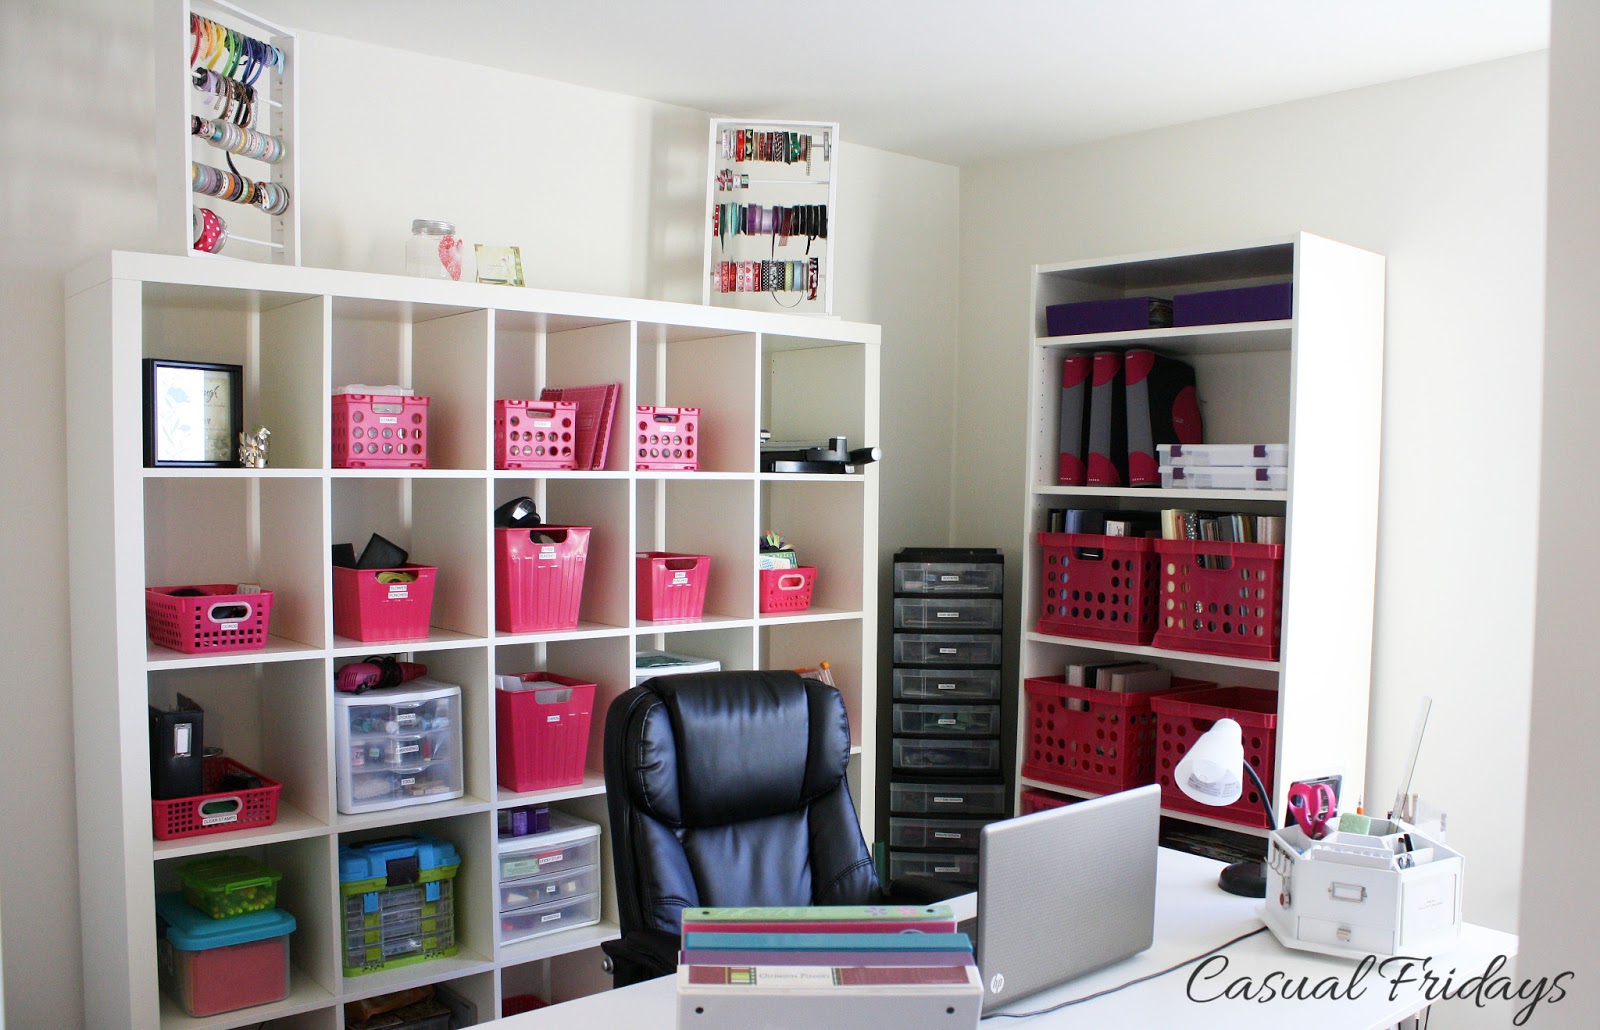 Casual Fridays: Organizing My Scrap Room - The Details